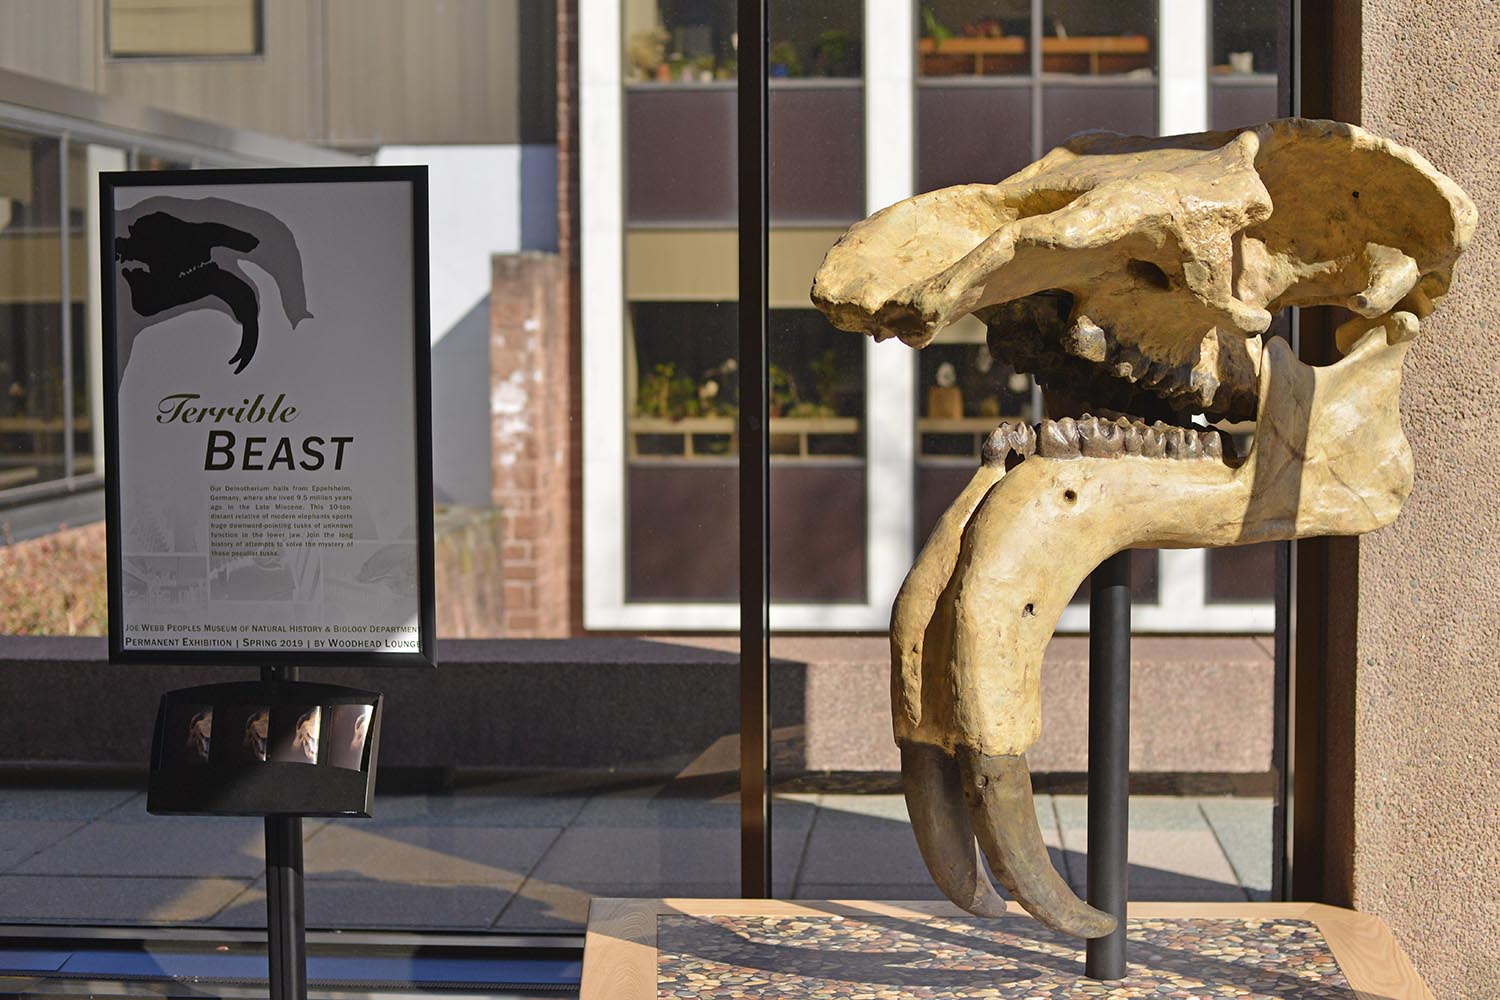 Exley Science Center is home to its second prehistoric specimen—a massive land animal known as a Deinotherium giganteum—or “terrible beast.” The skull cast is displayed in the hallway between Exley Science Center and the passway to Shanklin Laboratory and is part of the Joe Webb Peoples Museum of Natural History. The exhibit was installed on Feb. 26.